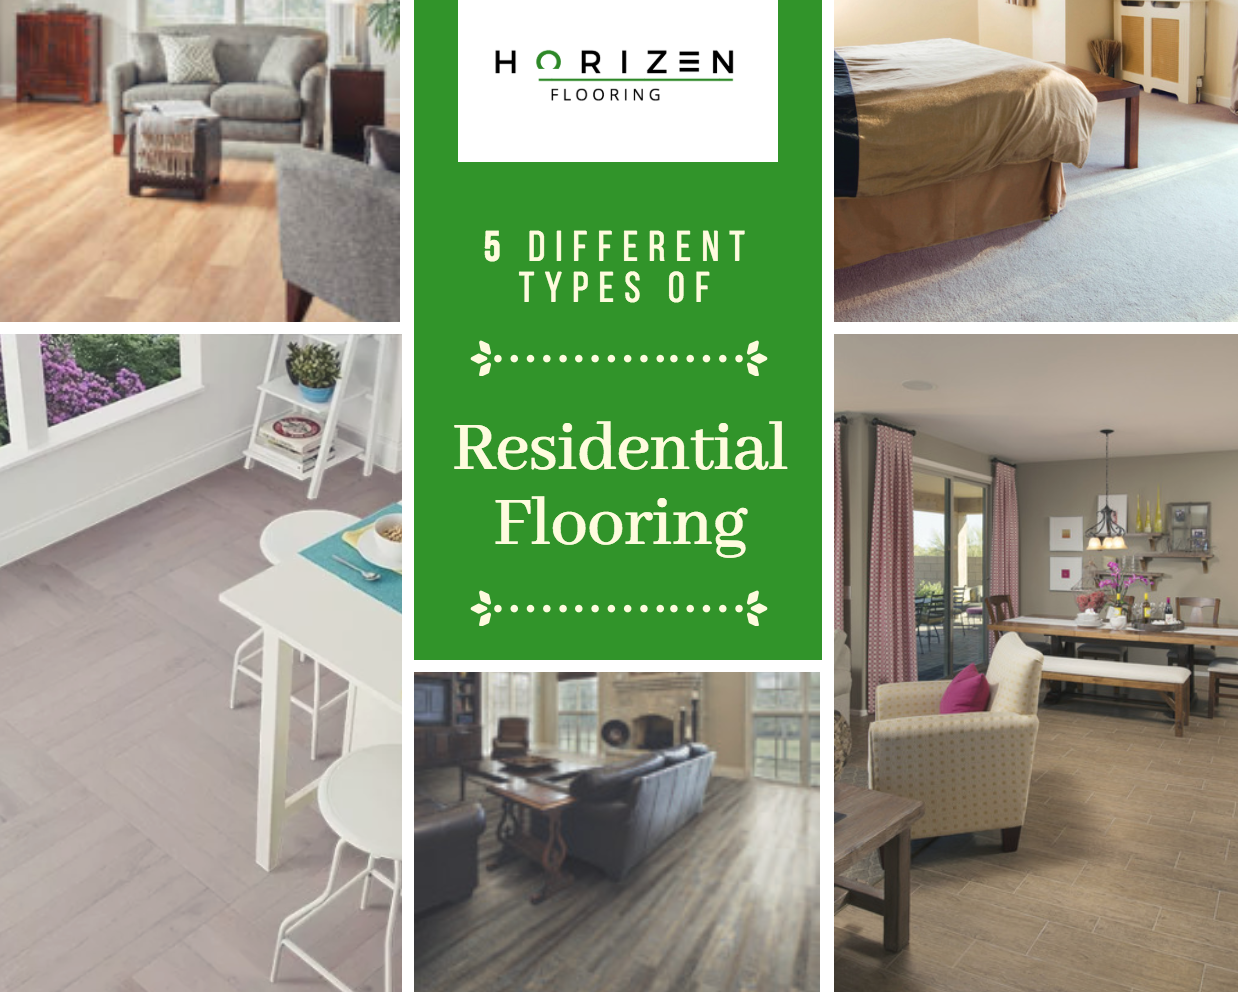 Horizen Flooring presents to you a picture collage of 5 different types of residential flooring. It consists of Hardwood, Vinyl, Laminate, Carpet, and Tile. Horizen Flooring offers full turnkey flooring services to the Greater Austin and surrounding areas, specialising but not limited to: hardwood, vinyl, laminate, carpet, and tile. For more information, call (512) 806-9434 today.